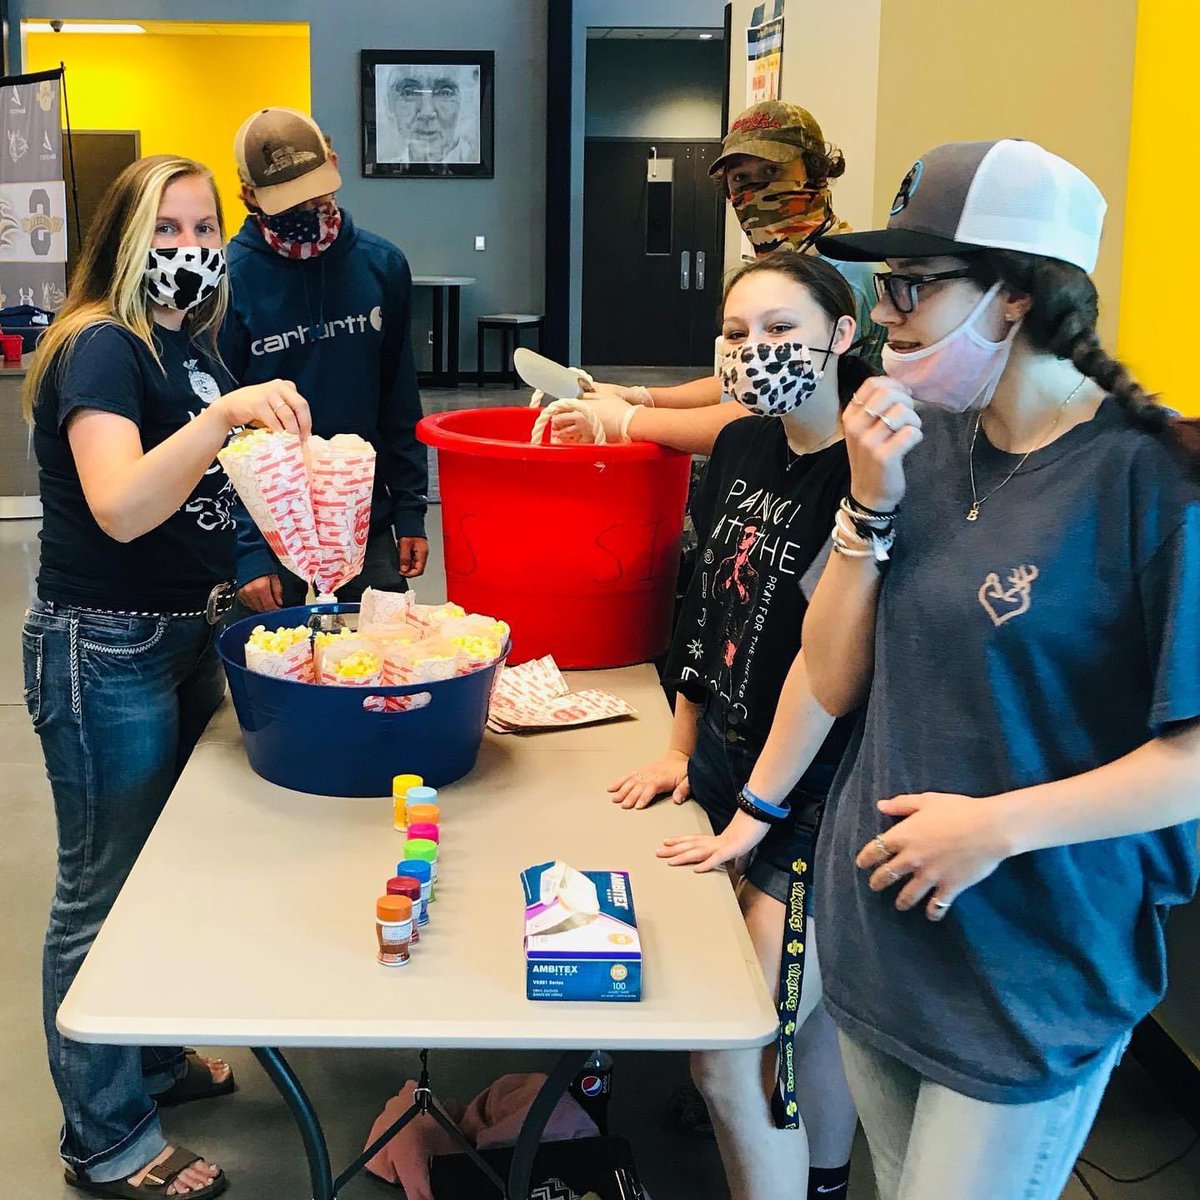 Another great day at South as we continue to recognize our teachers. Today the FFA members treated the teachers to a popcorn bar complete with different flavored toppings. #teacherappreciationweek @sihsffa